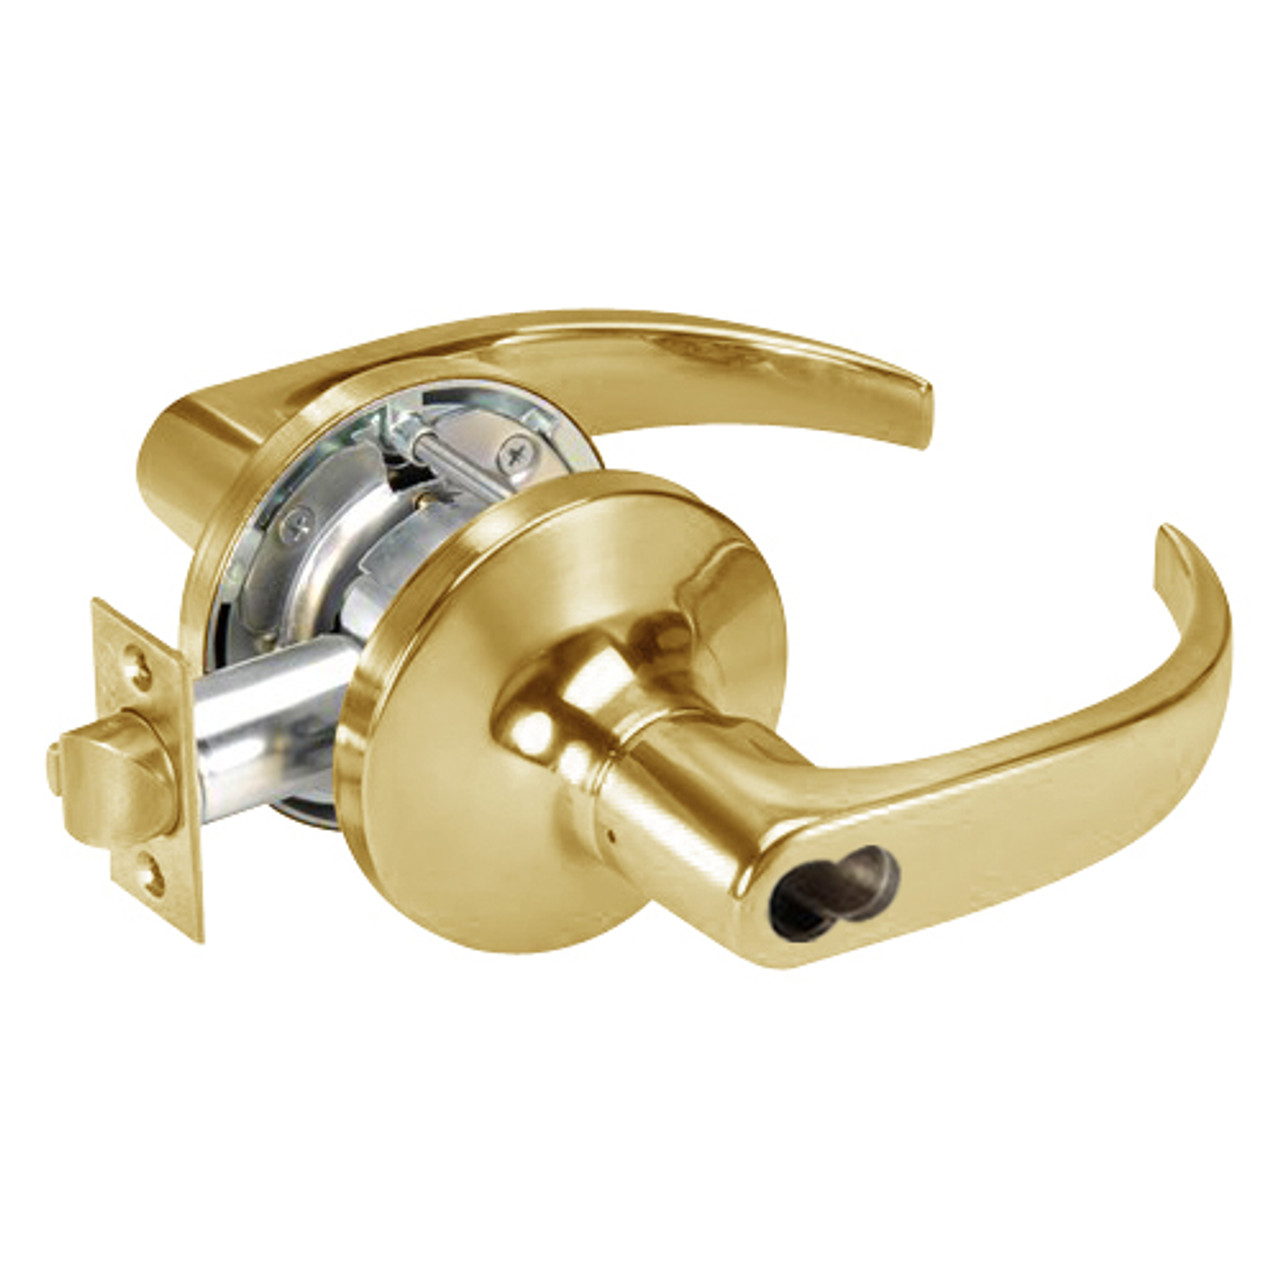 B-PB5404LN-606 Yale 5400LN Series Single Cylinder Entry Cylindrical Locks with Pacific Beach Lever Prepped for SFIC in Satin Brass